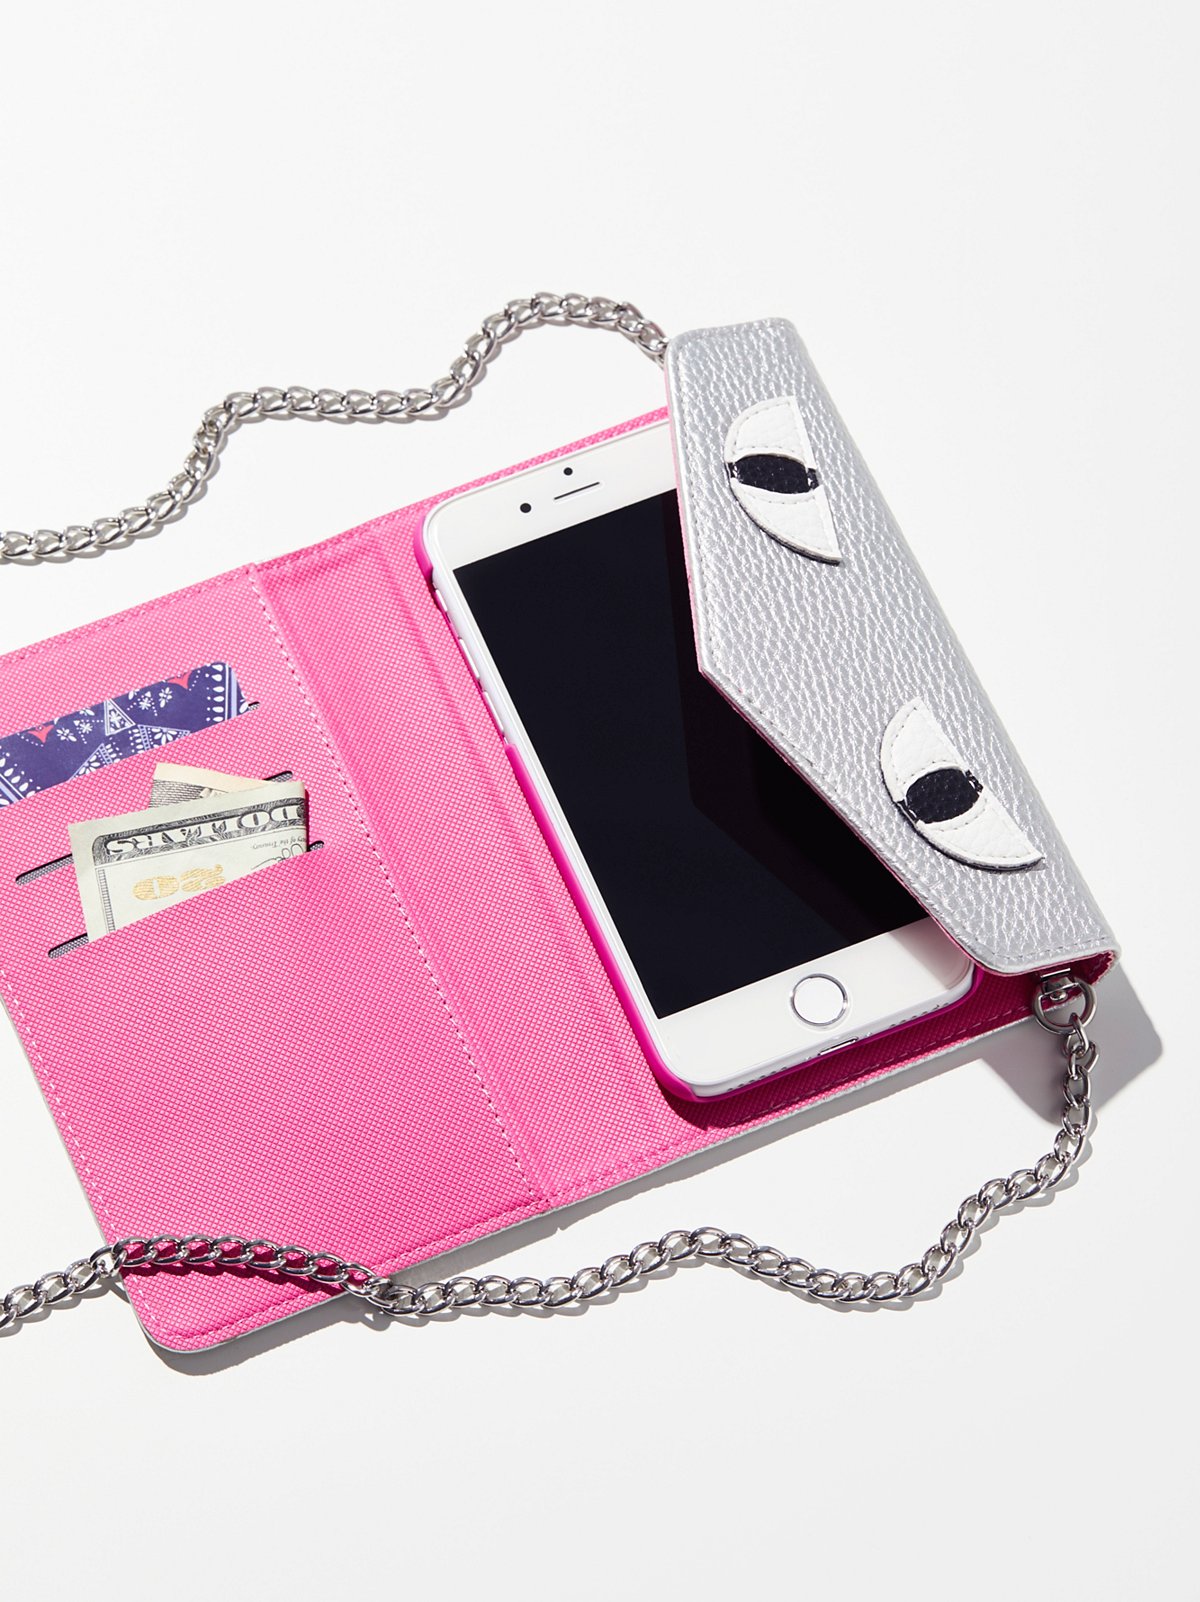 iPhoria Monster Crossbody iPhone Case at Free People Clothing Boutique